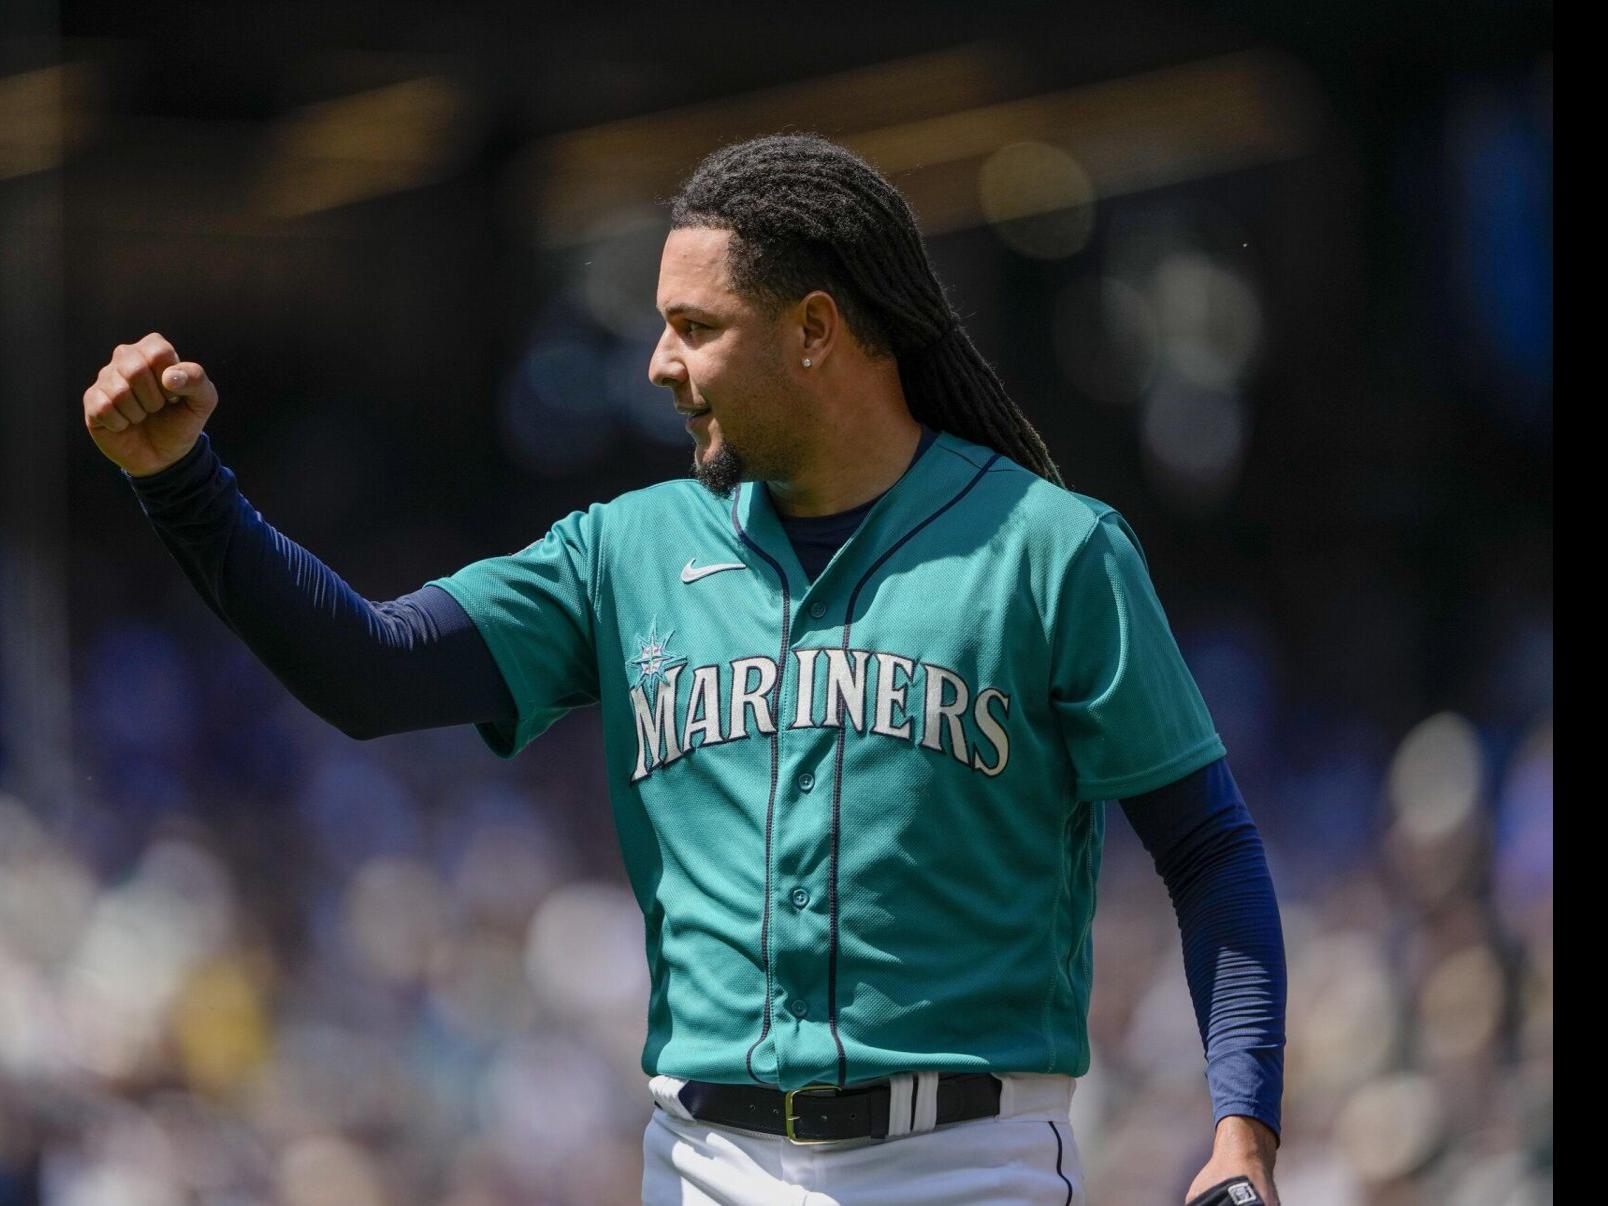 Luis Castillo shuts down Pirates with ease as Mariners coast to